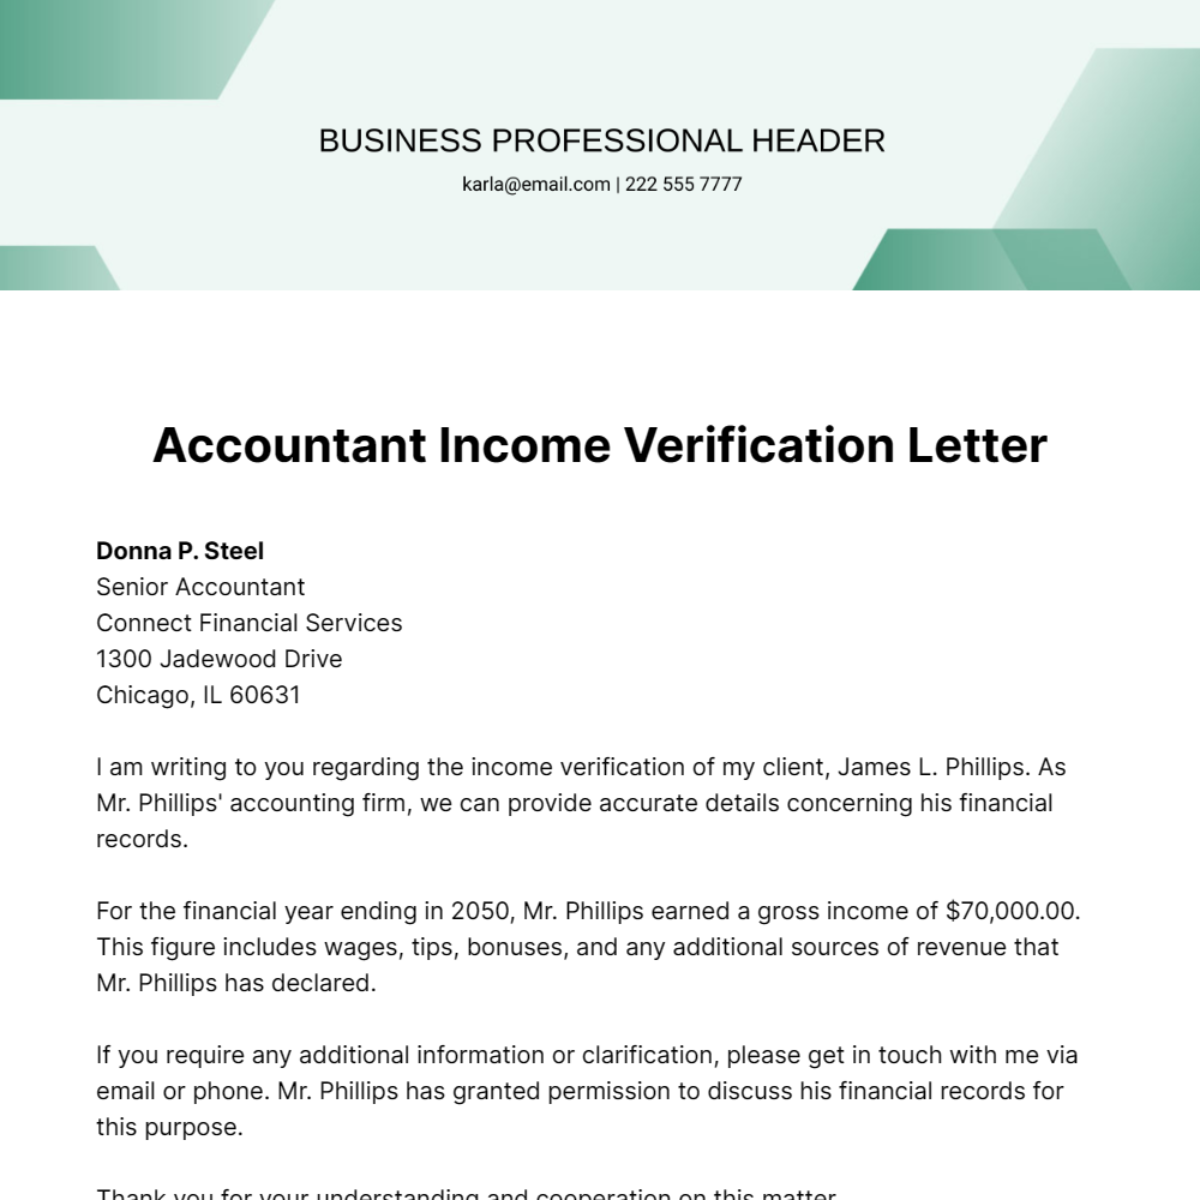 Accountant Income Verification Letter Template